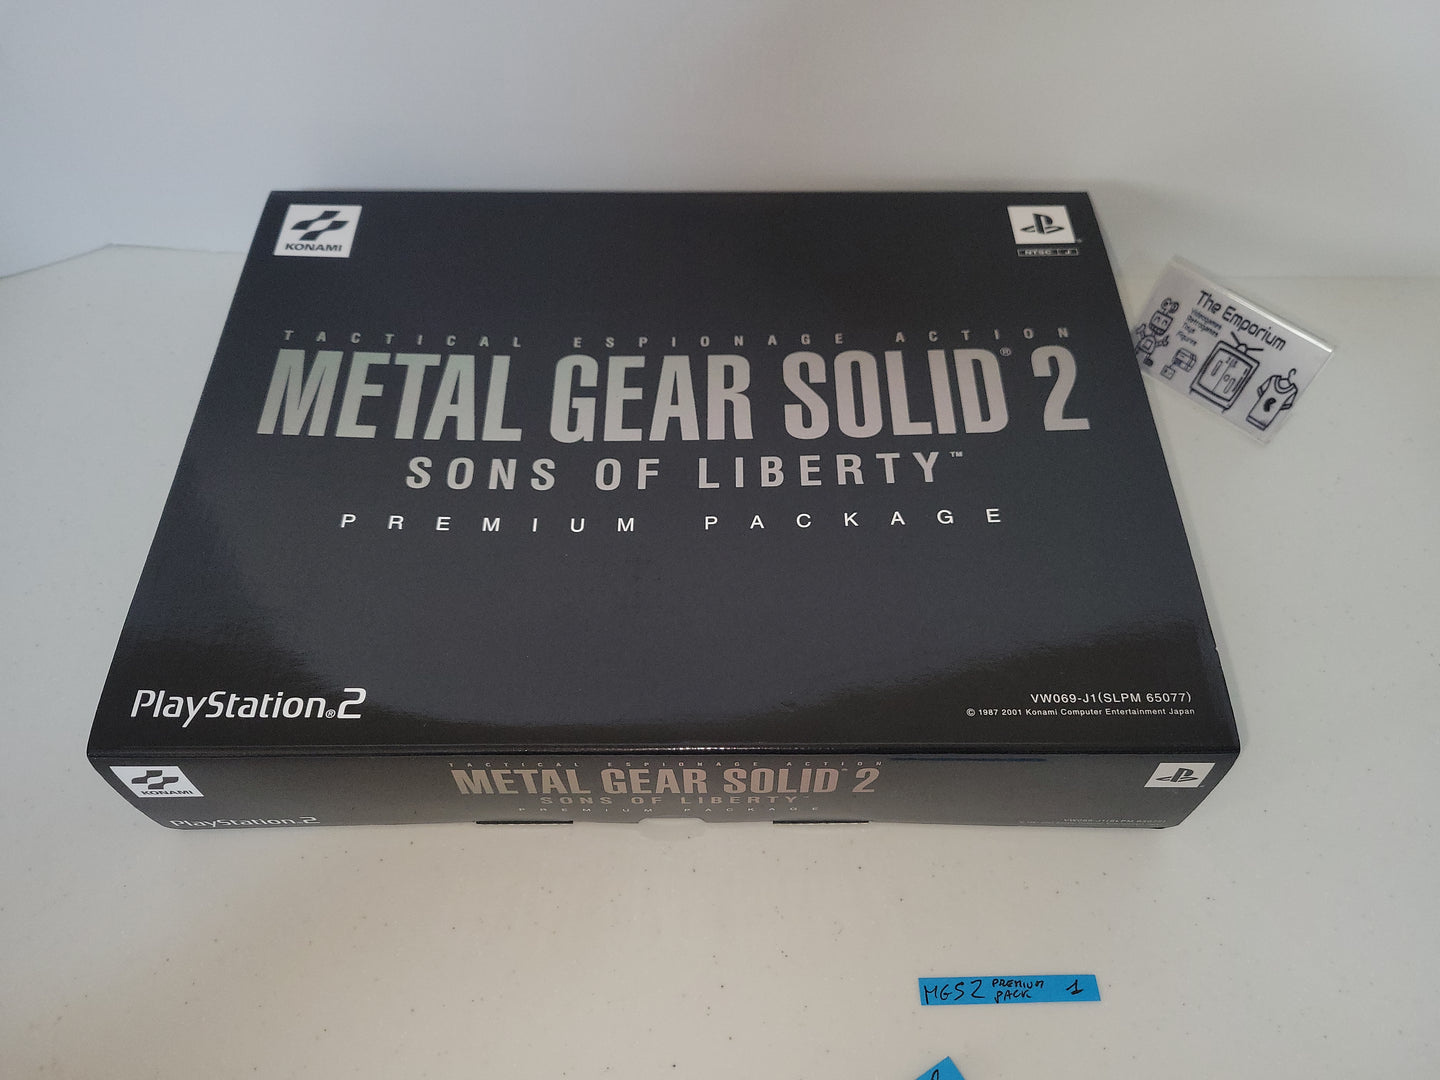 Metal Gear Solid 2 [Premium Package] - Sony PS2 Playstation 2